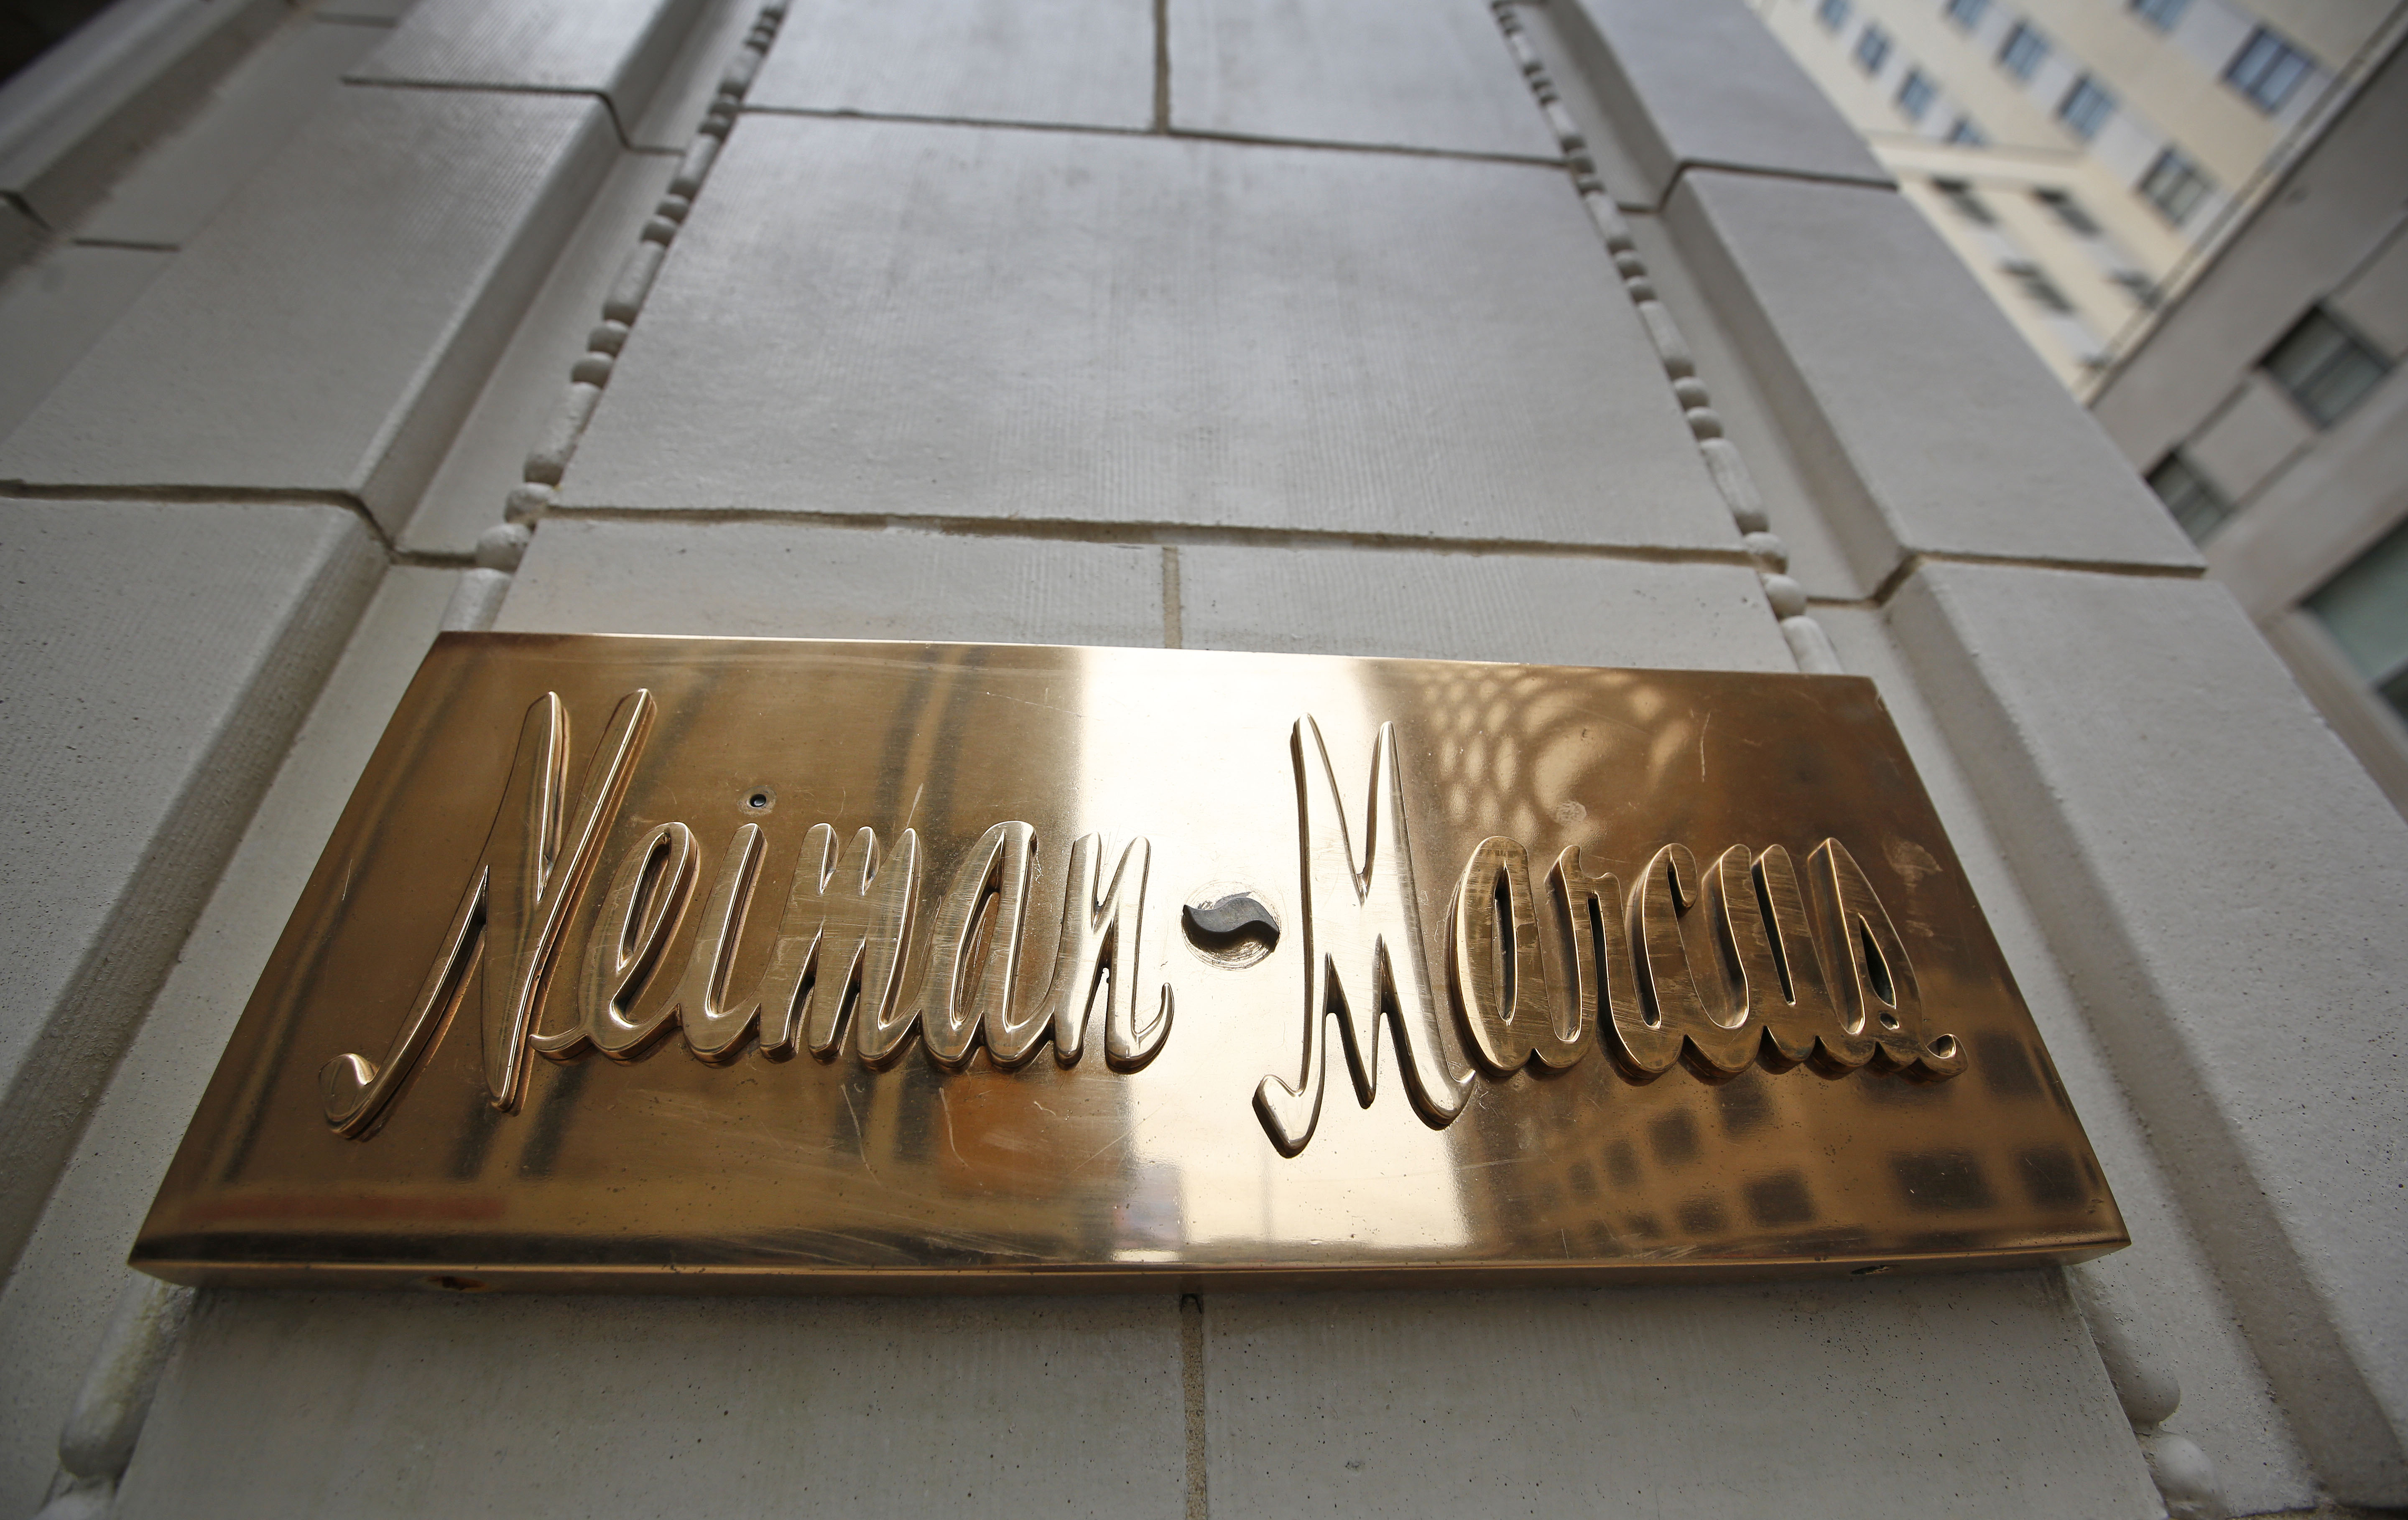 Neiman Marcus CEO angers employees with mansion magazine article